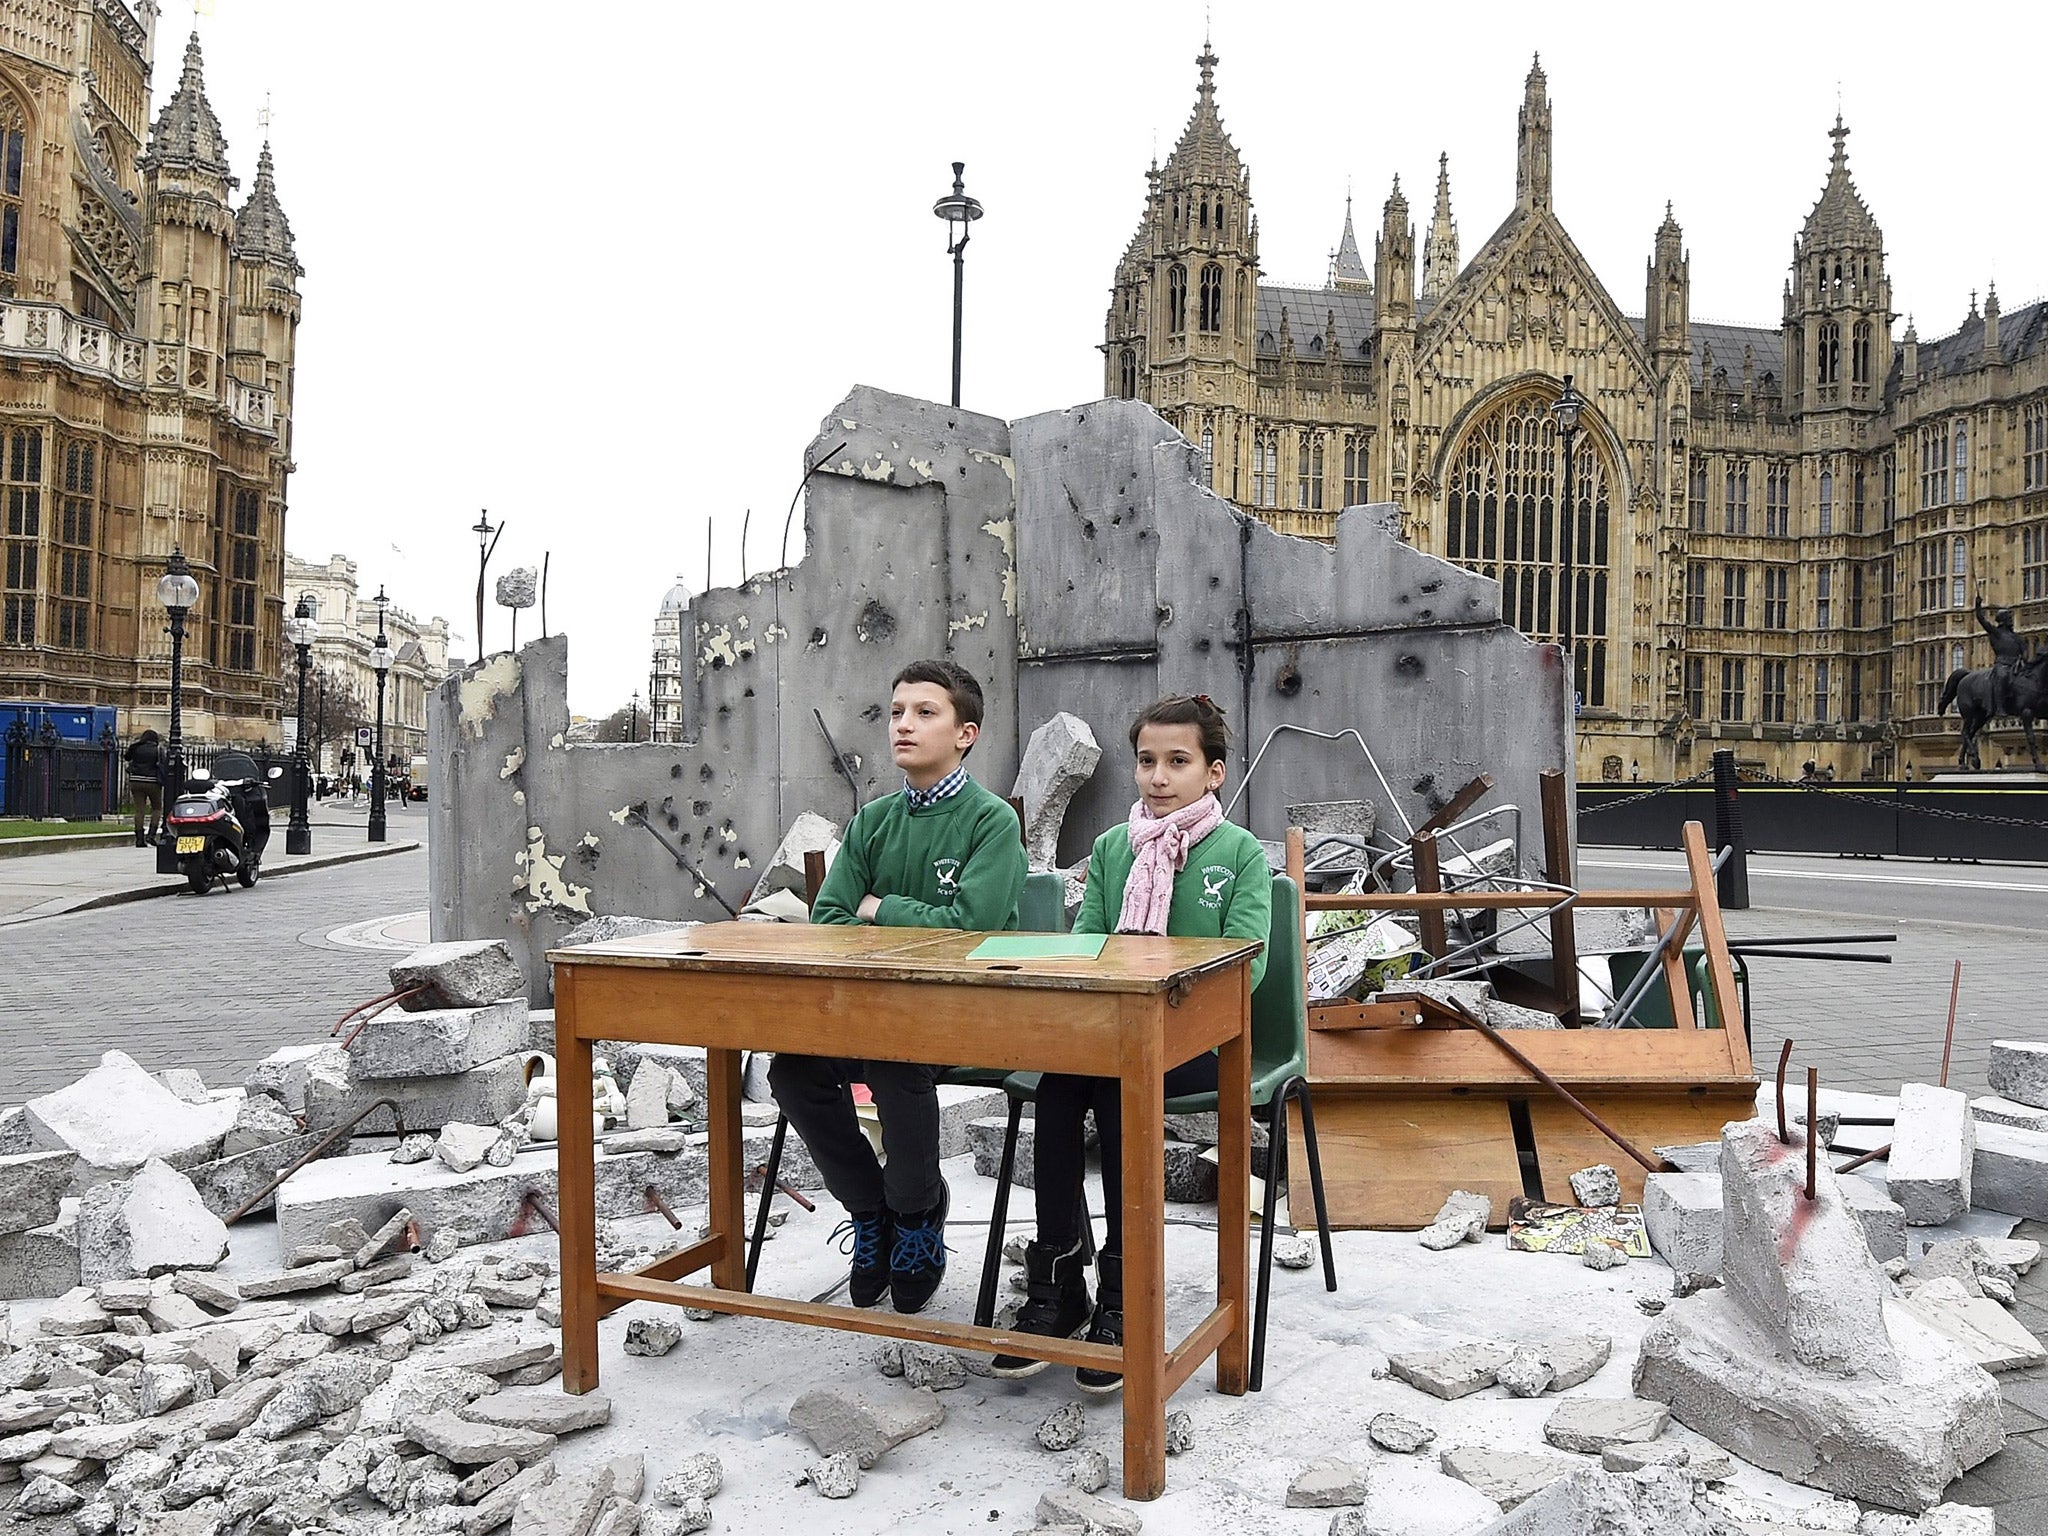 Abdallah, 12, and Dania, 10, whose school was bombed in Aleppo, sit in a mock up of a destroyed classroom, outside the Houses of Parliament in London